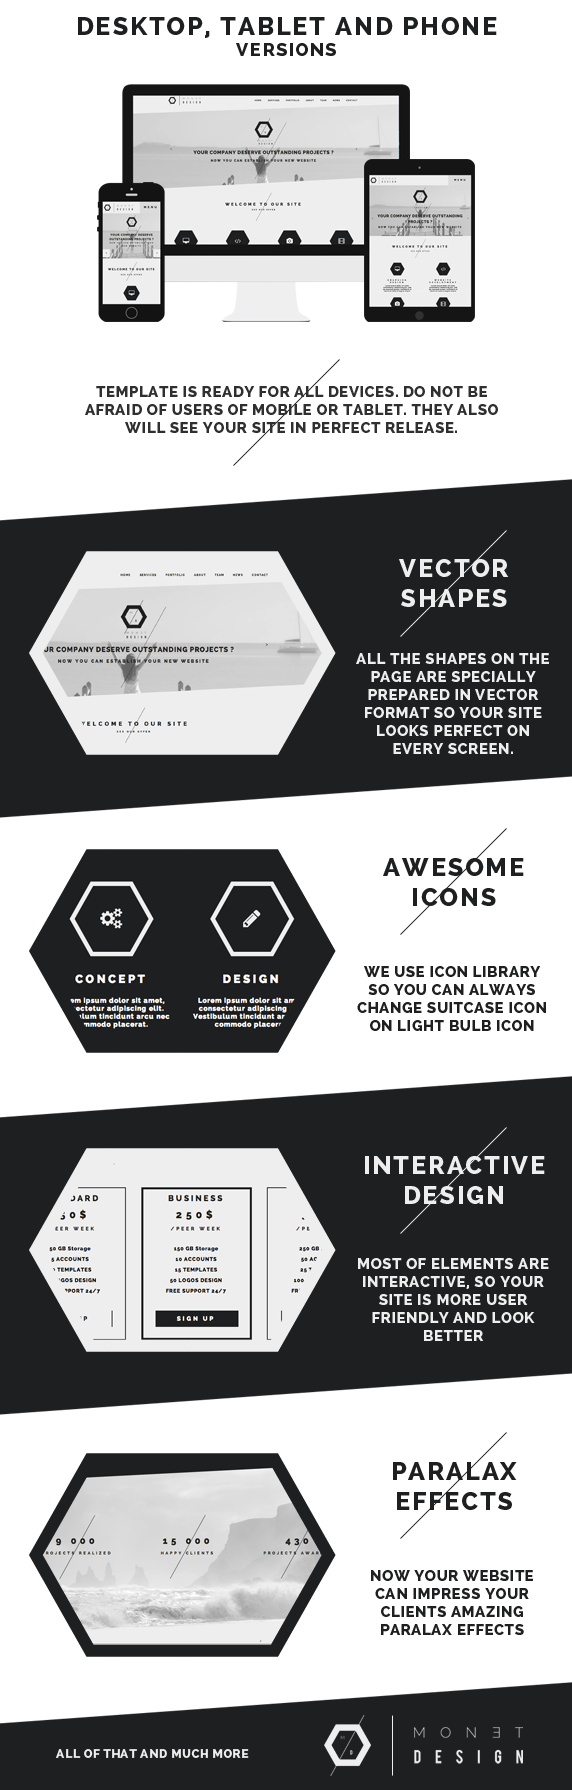 Monet - One Page Modern Muse Template - 3